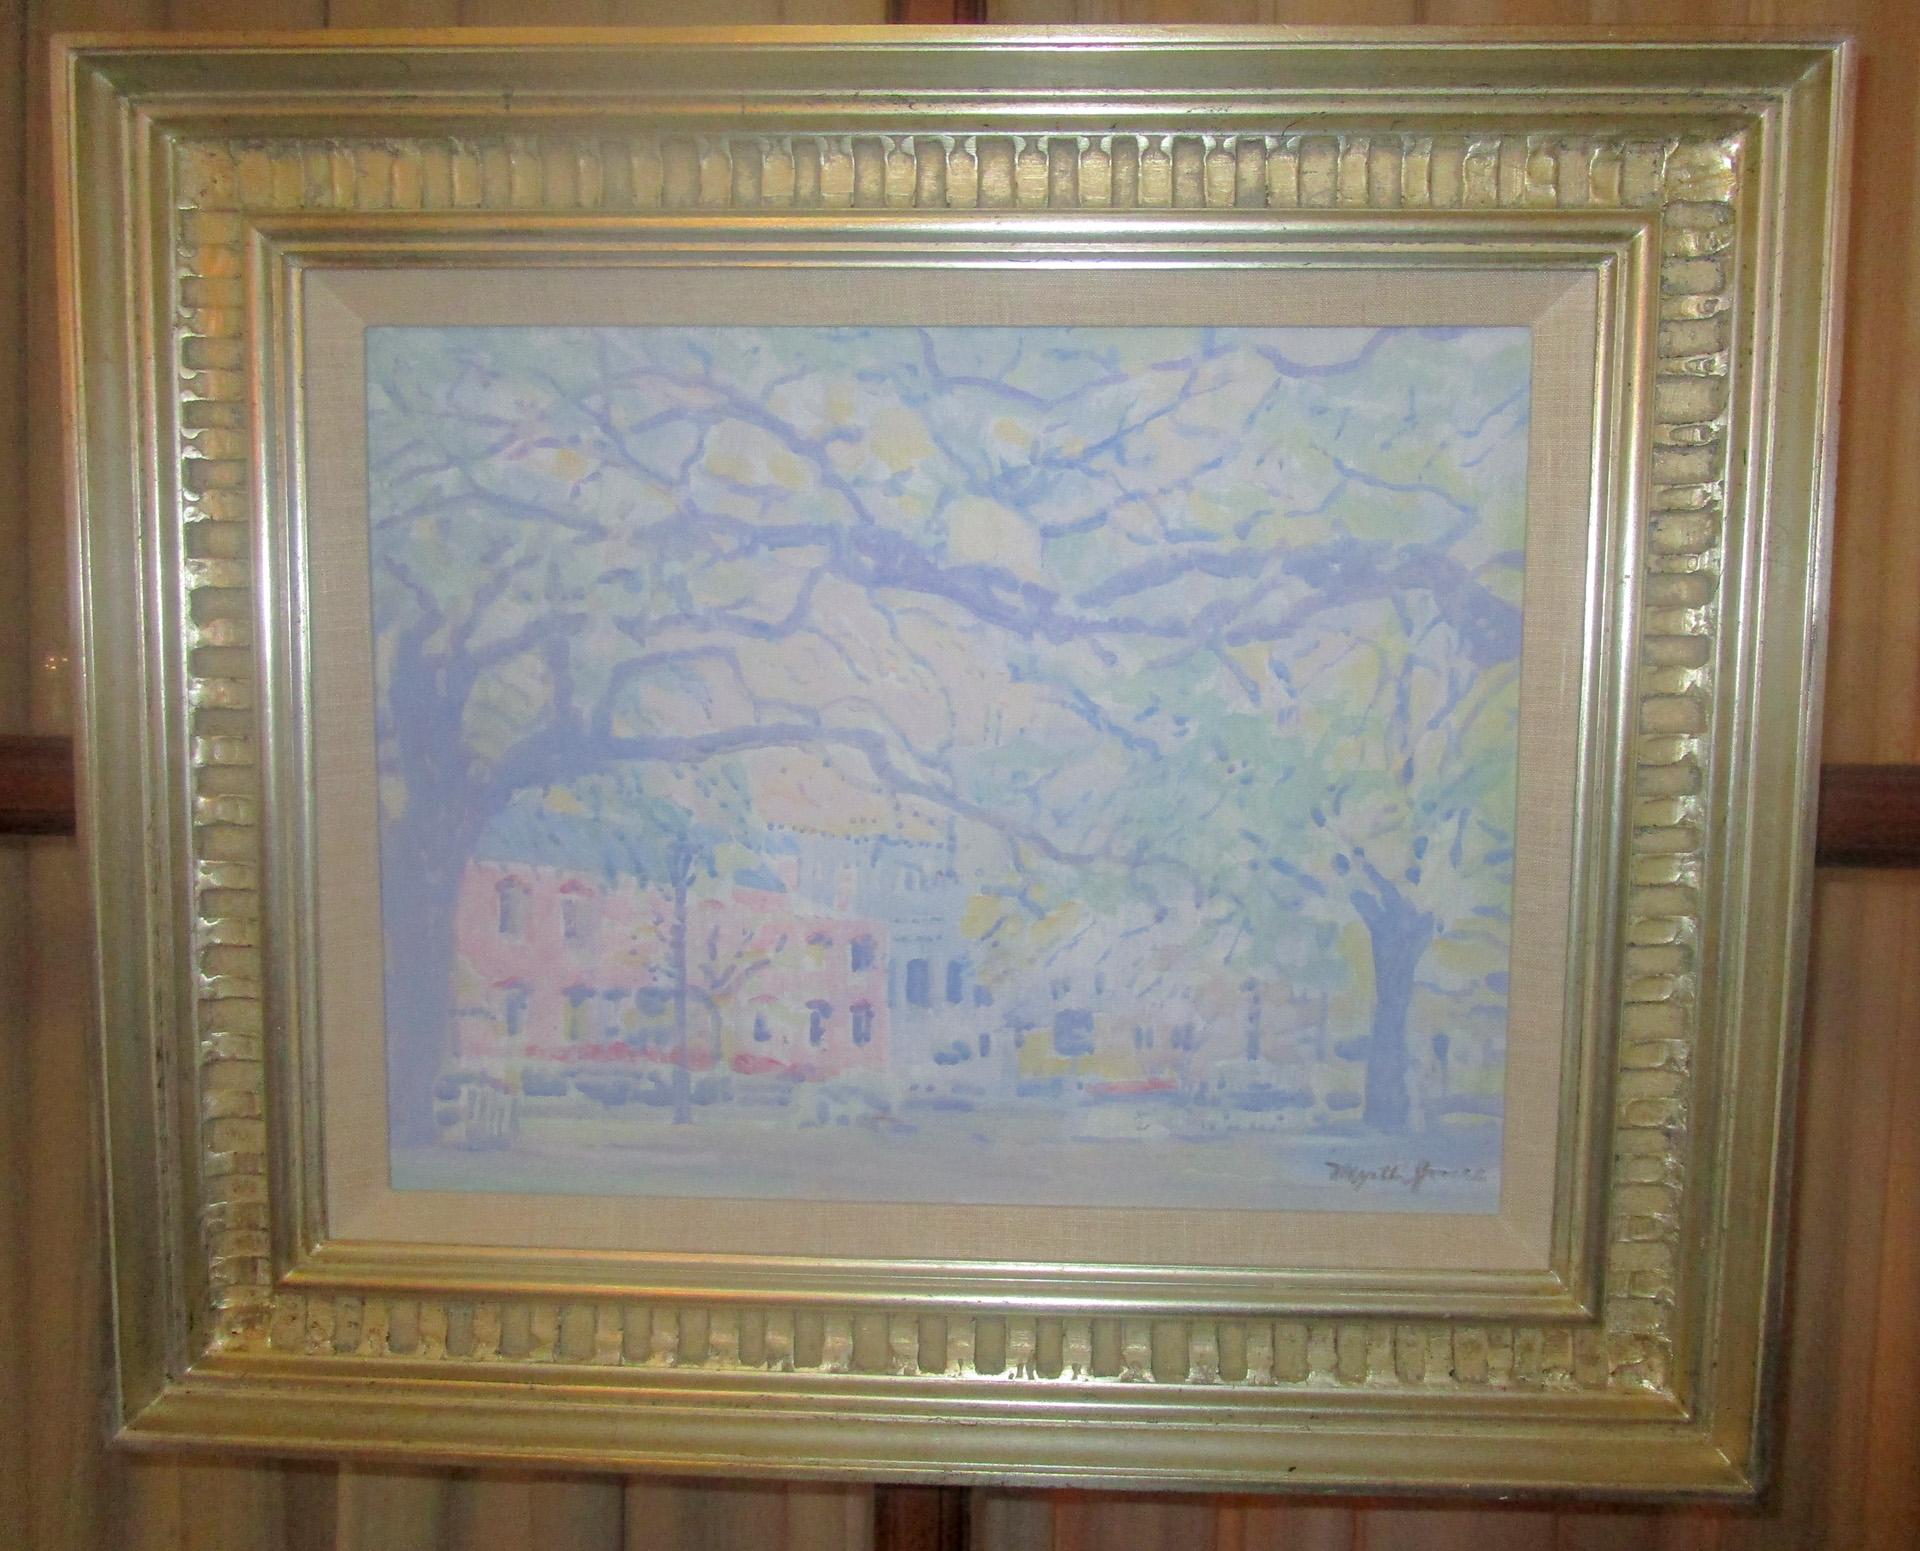 This lovely Impessionist style painting is by local artist Myrle Jones and depicts the Old Pink House restaurant on Reynolds Square here in Savannah, Georgia. From the lighter colors of this painting, it would have been done in the later part of her